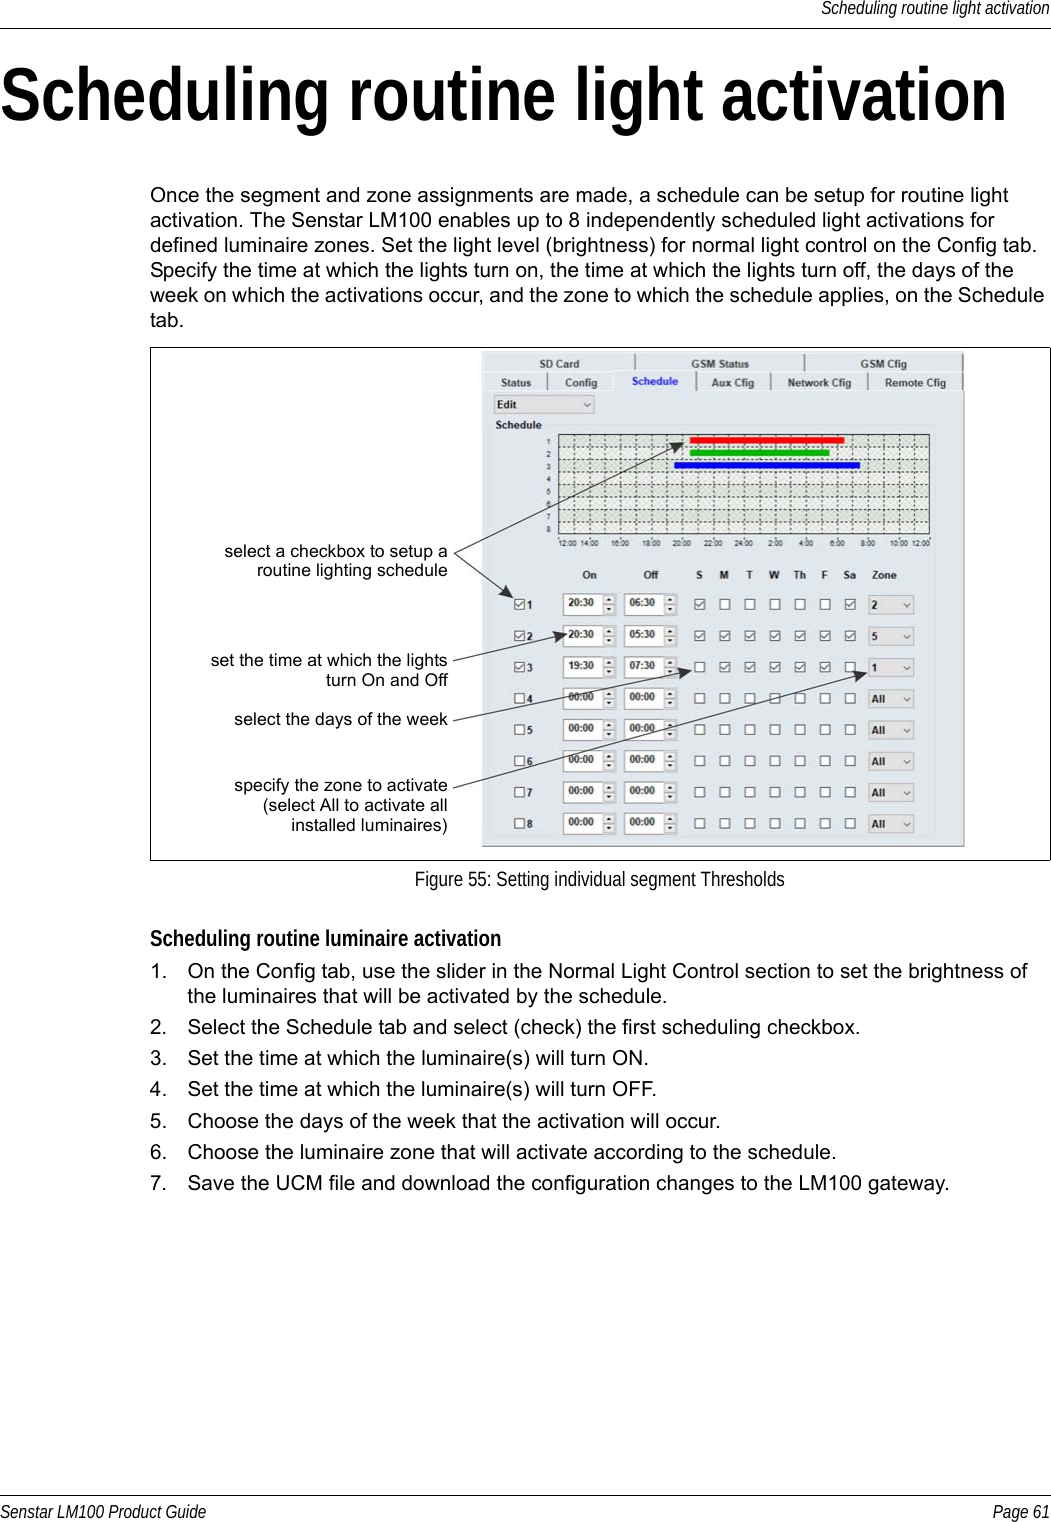 Scheduling routine light activationSenstar LM100 Product Guide Page 61Scheduling routine light activationOnce the segment and zone assignments are made, a schedule can be setup for routine light activation. The Senstar LM100 enables up to 8 independently scheduled light activations for defined luminaire zones. Set the light level (brightness) for normal light control on the Config tab. Specify the time at which the lights turn on, the time at which the lights turn off, the days of the week on which the activations occur, and the zone to which the schedule applies, on the Schedule tab. Scheduling routine luminaire activation1. On the Config tab, use the slider in the Normal Light Control section to set the brightness of the luminaires that will be activated by the schedule.2. Select the Schedule tab and select (check) the first scheduling checkbox.3. Set the time at which the luminaire(s) will turn ON.4. Set the time at which the luminaire(s) will turn OFF.5. Choose the days of the week that the activation will occur.6. Choose the luminaire zone that will activate according to the schedule.7. Save the UCM file and download the configuration changes to the LM100 gateway.Figure 55: Setting individual segment Thresholdsselect a checkbox to setup aset the time at which the lightsroutine lighting schedule turn On and Offselect the days of the weekspecify the zone to activate(select All to activate all installed luminaires)